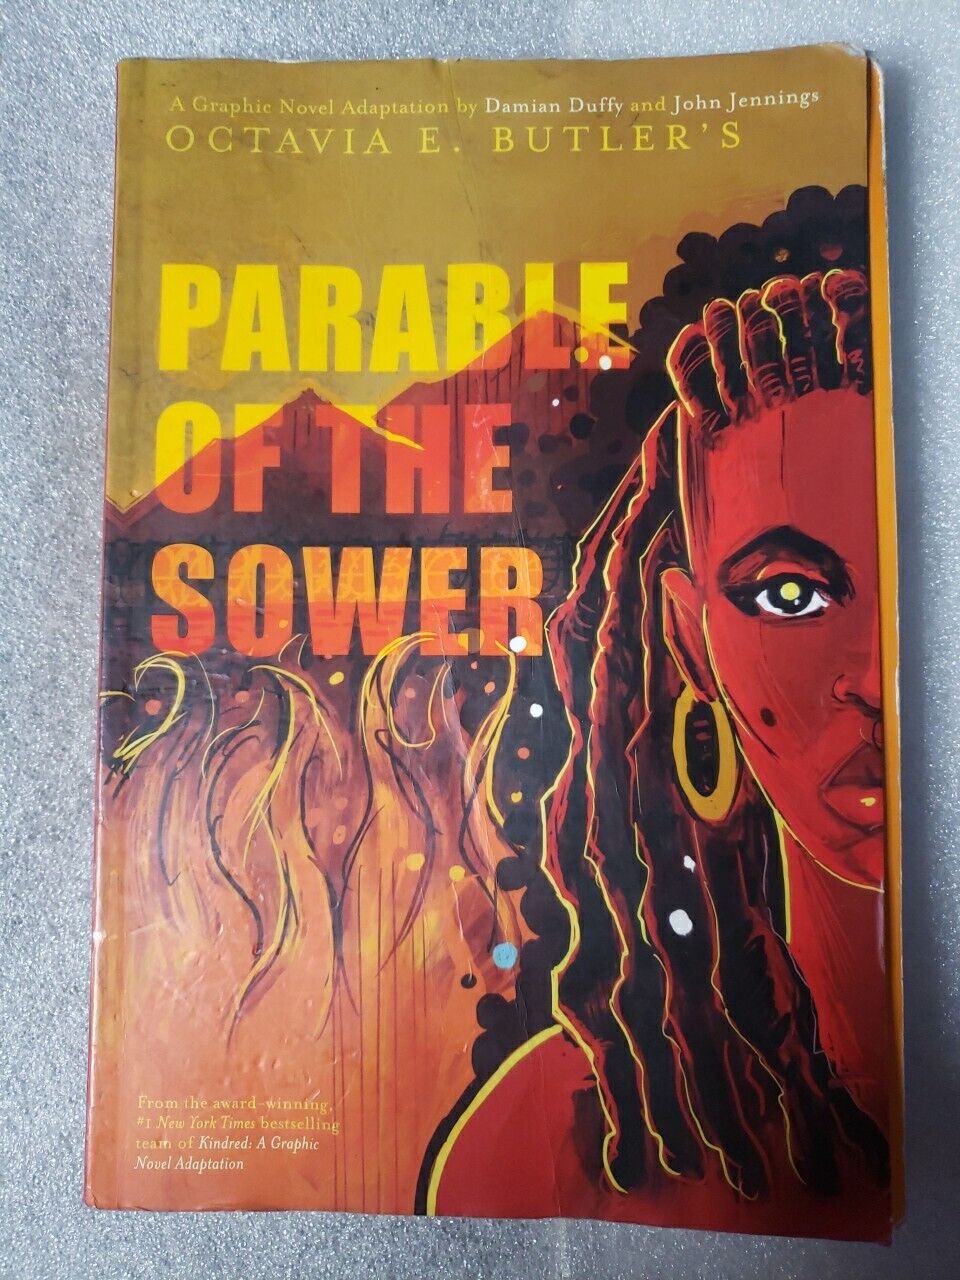 Parable of the Sower: a Graphic Novel Adaptation 2021